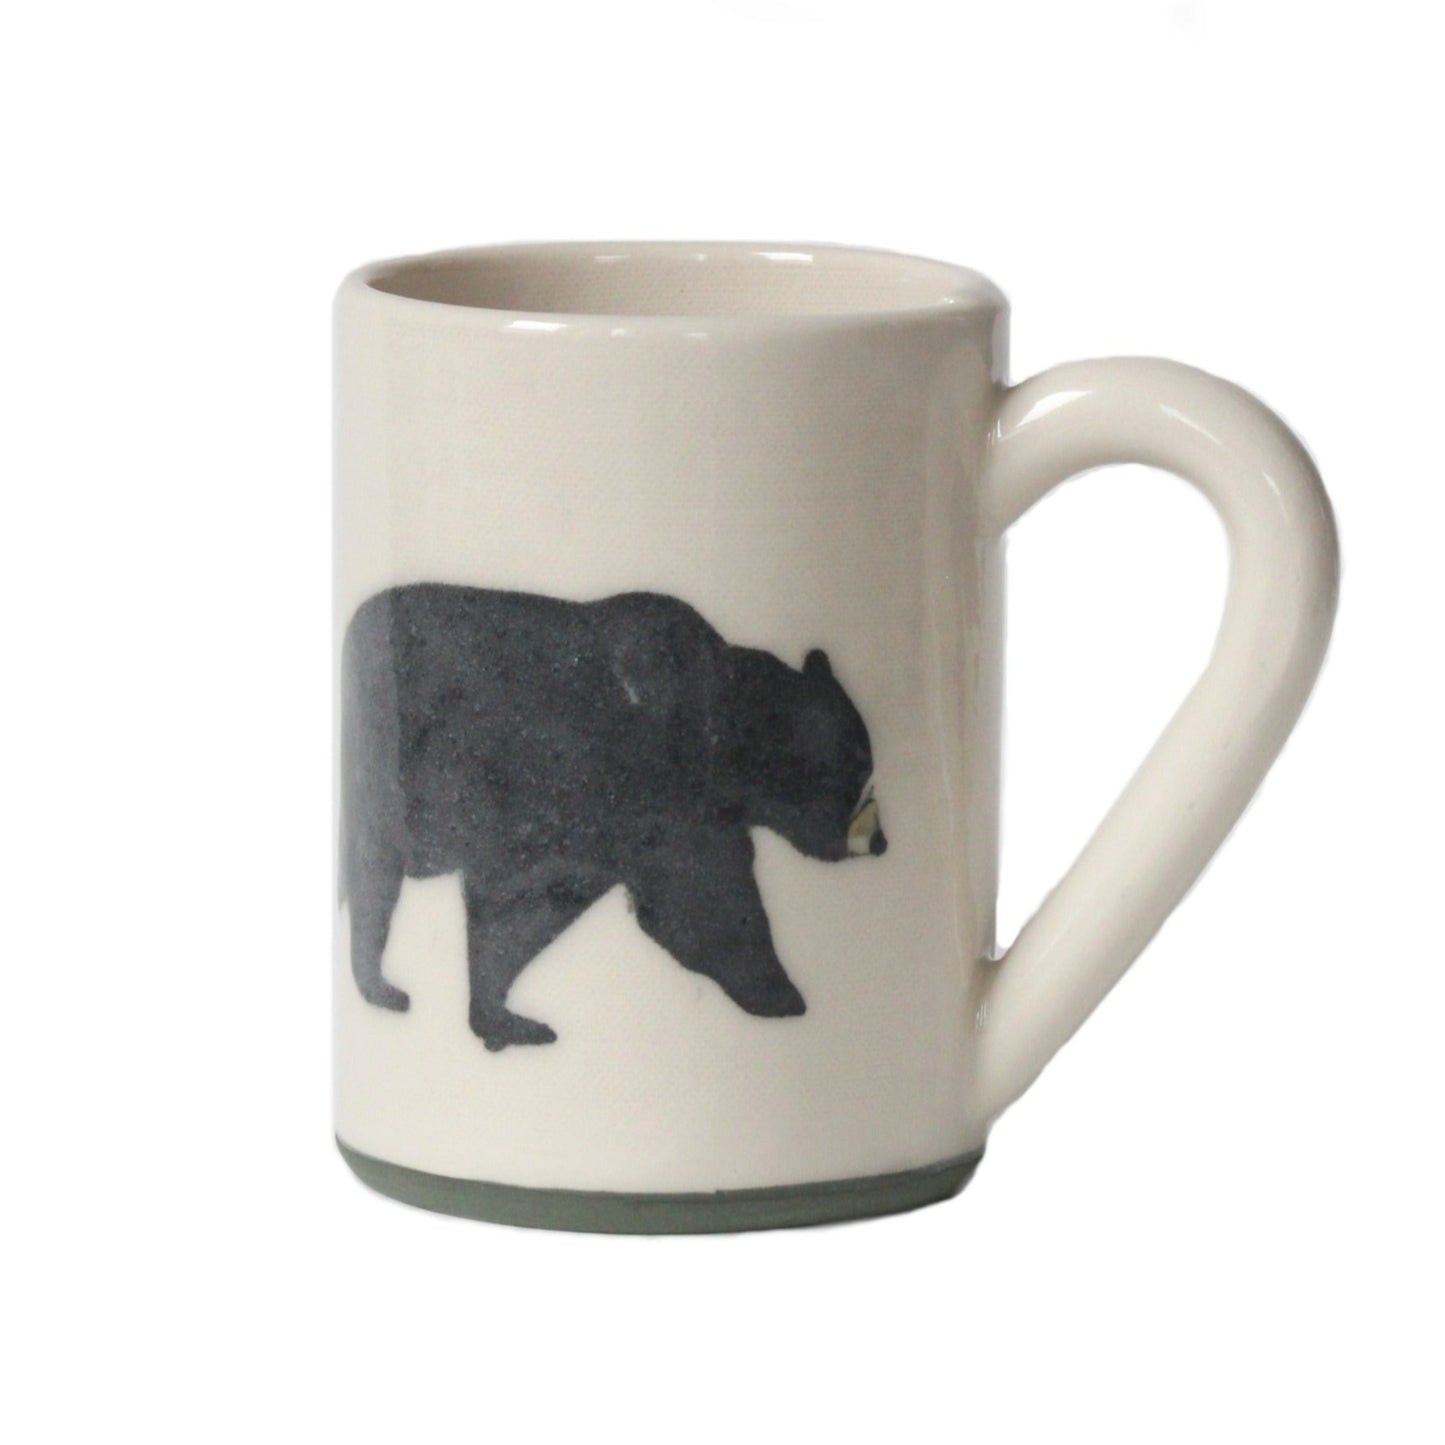 Handmade stoneware clay mug with black bear painting, made in Canada by Susan Robertson Pottery.